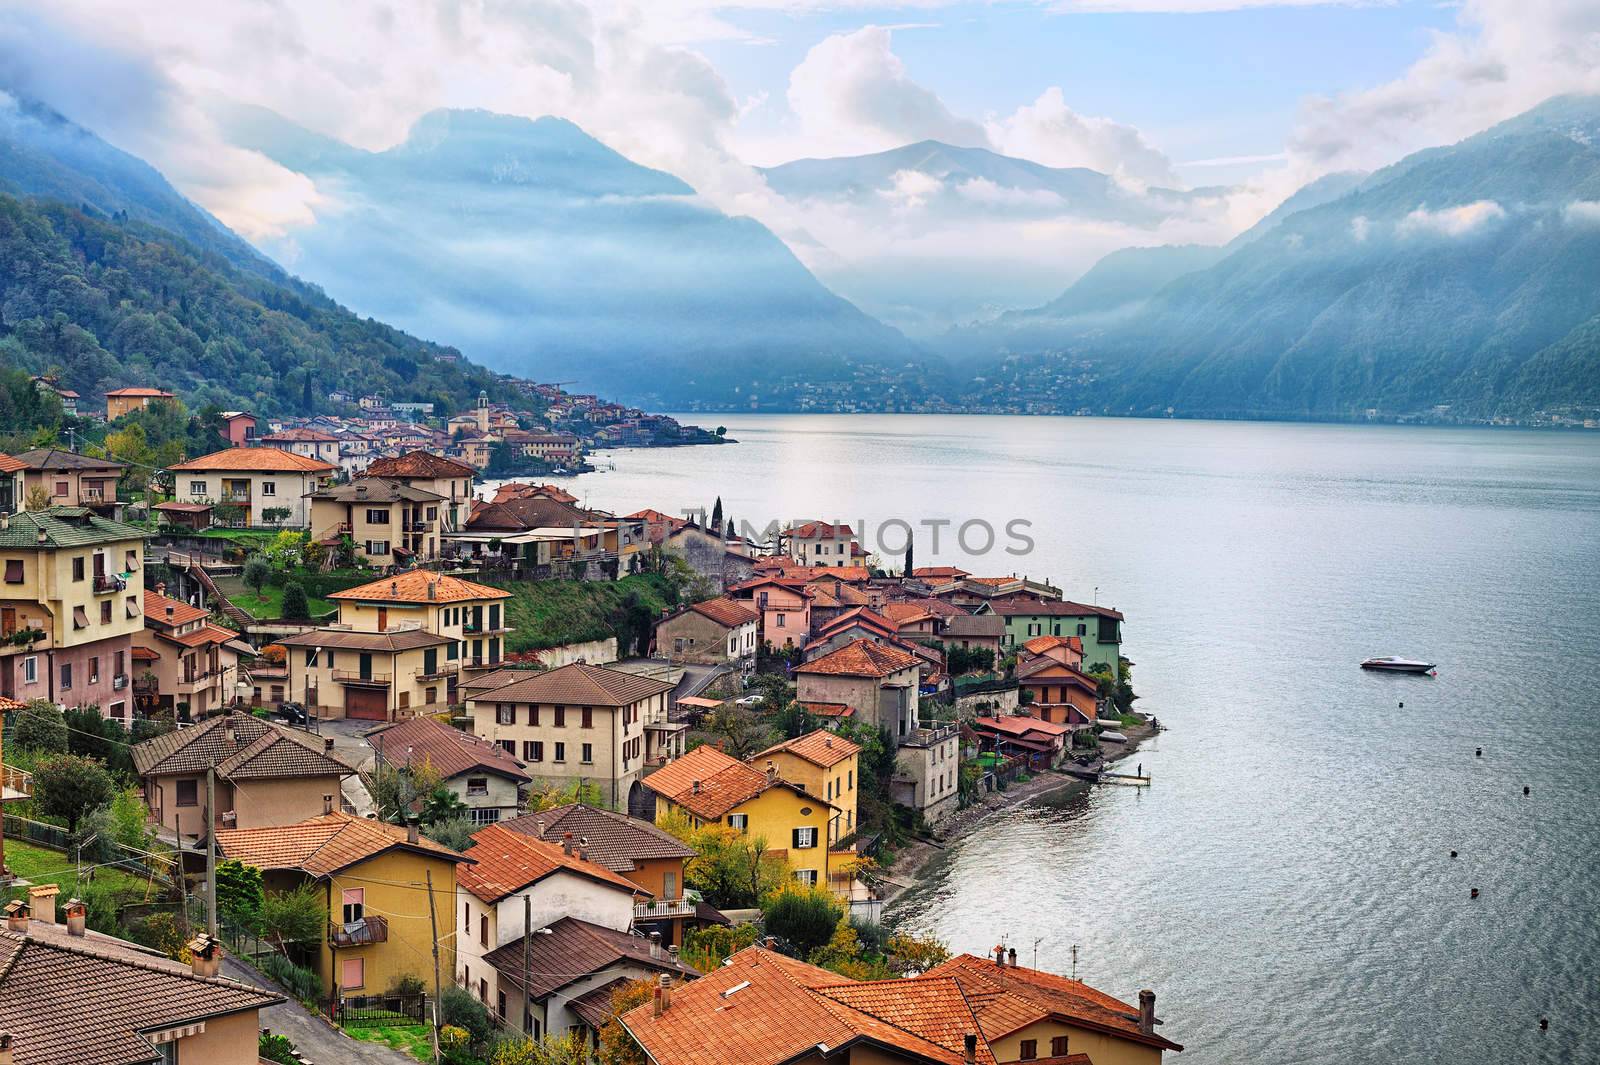 View of Como Lake, Milan, Italy, with Alps mountains in background